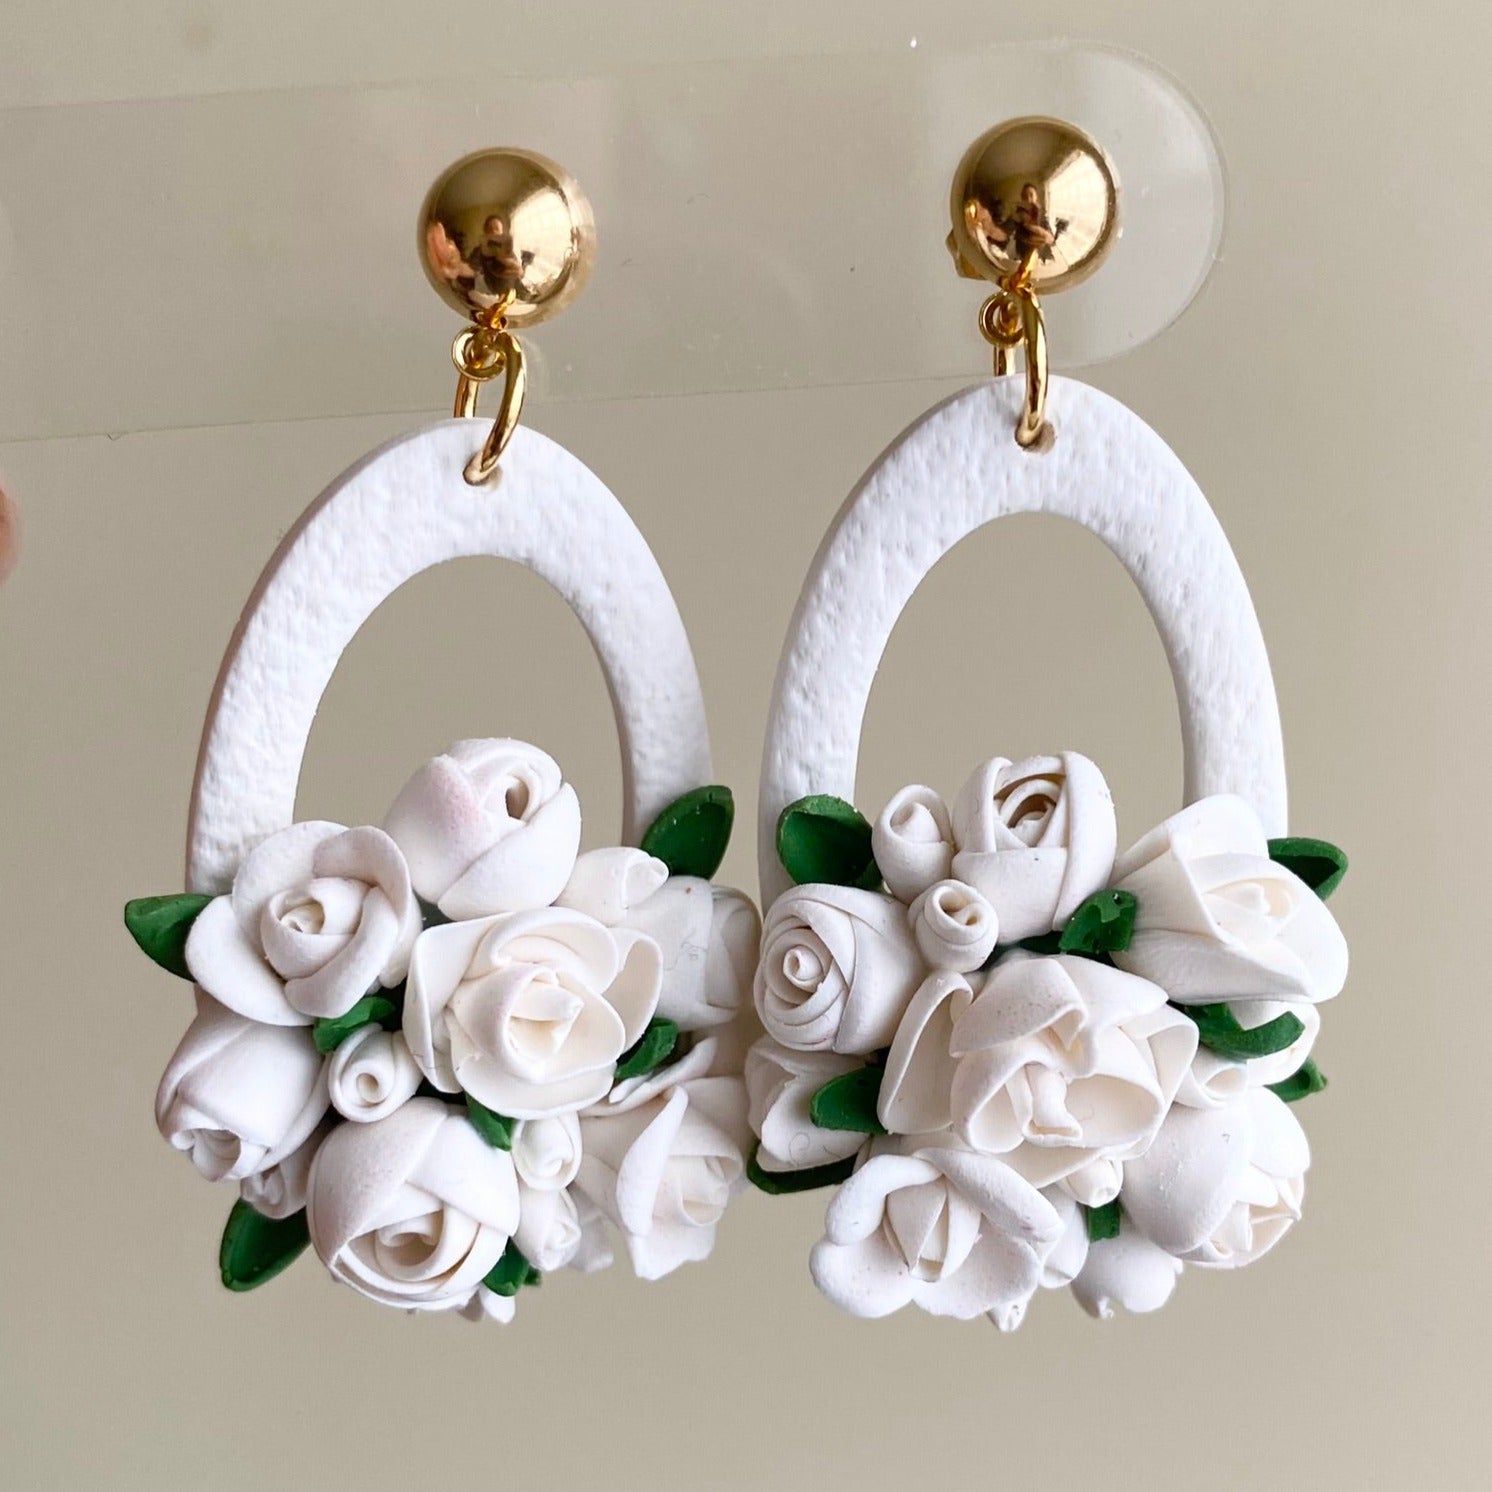 Handmade Polymer Clay Earrings, Floral Earrings, Dangle Earrings, White  Clay Earrings, Wood Earrings, Flowers, Gift for Her, Gift Idea